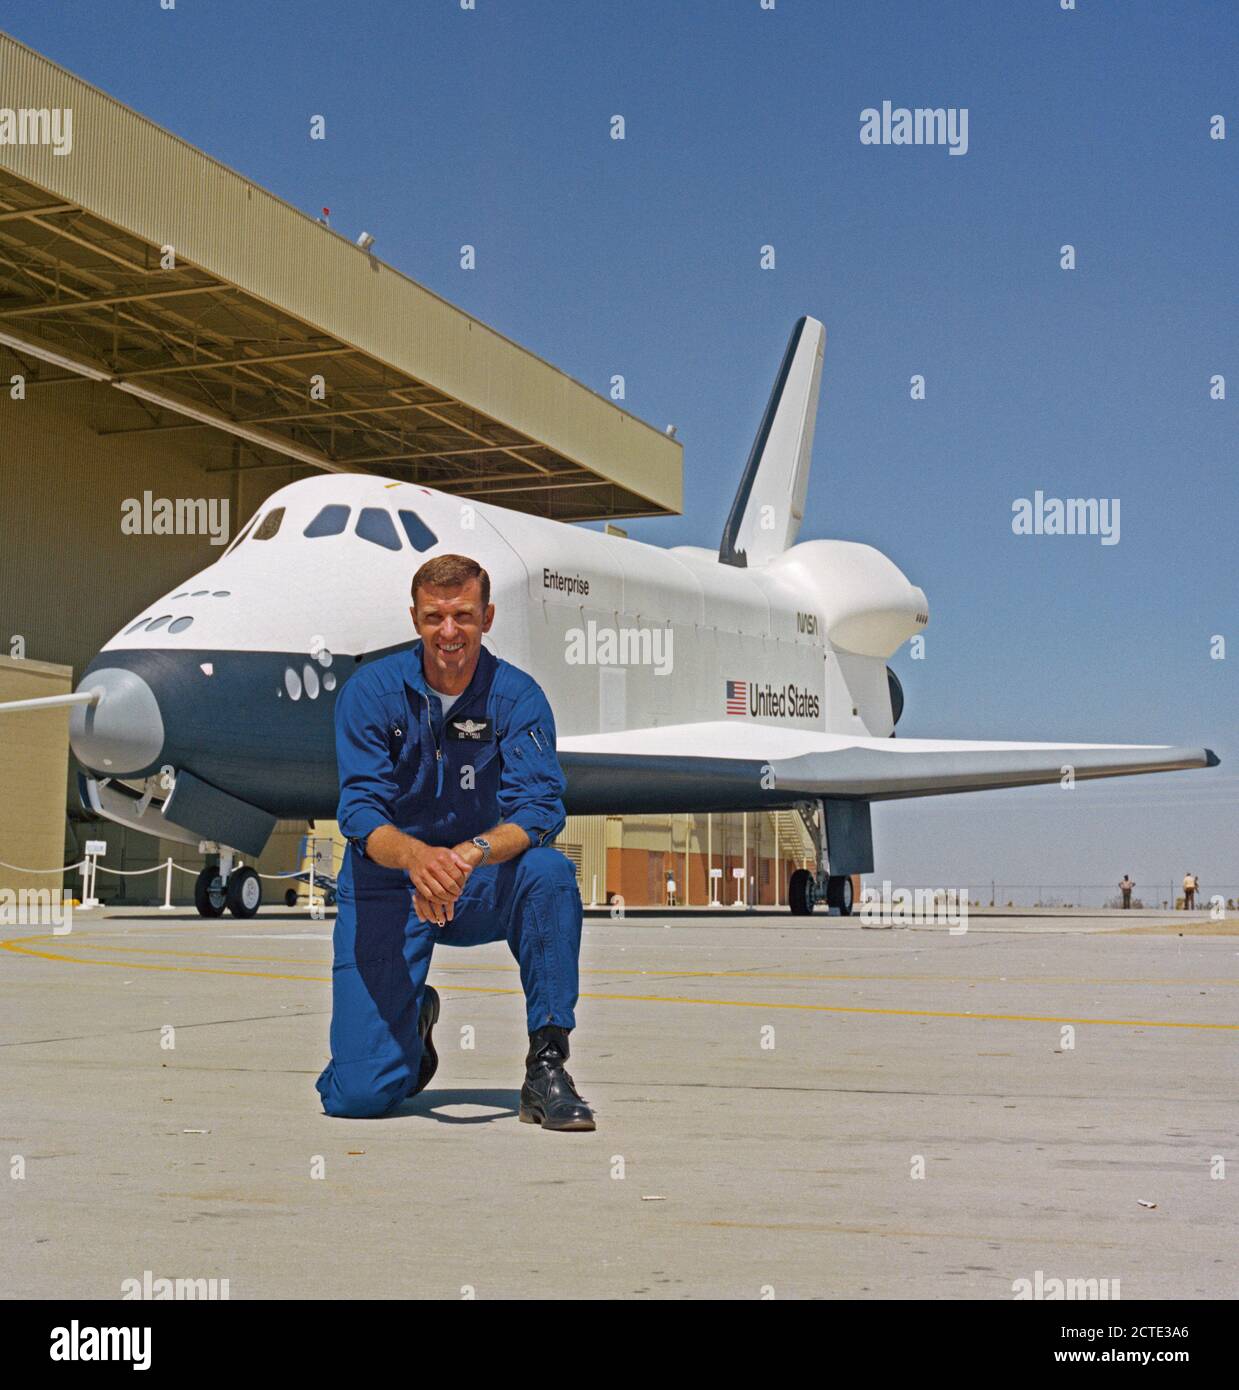 (17 Sept 1976) - - - Astronaut Joe H. Engle, commander of the second crew for the Space Shuttle Approach and Landing Tests (ALT), is photographed at the Rockwell International Space Division?s Orbiter assembly facility at Palmdale, California on the day of the roll out of the Space Shuttle Orbiter 101 ?Enterprise? spacecraft.  The DC-size airplane-like Orbiter 101 is in the background. Stock Photo